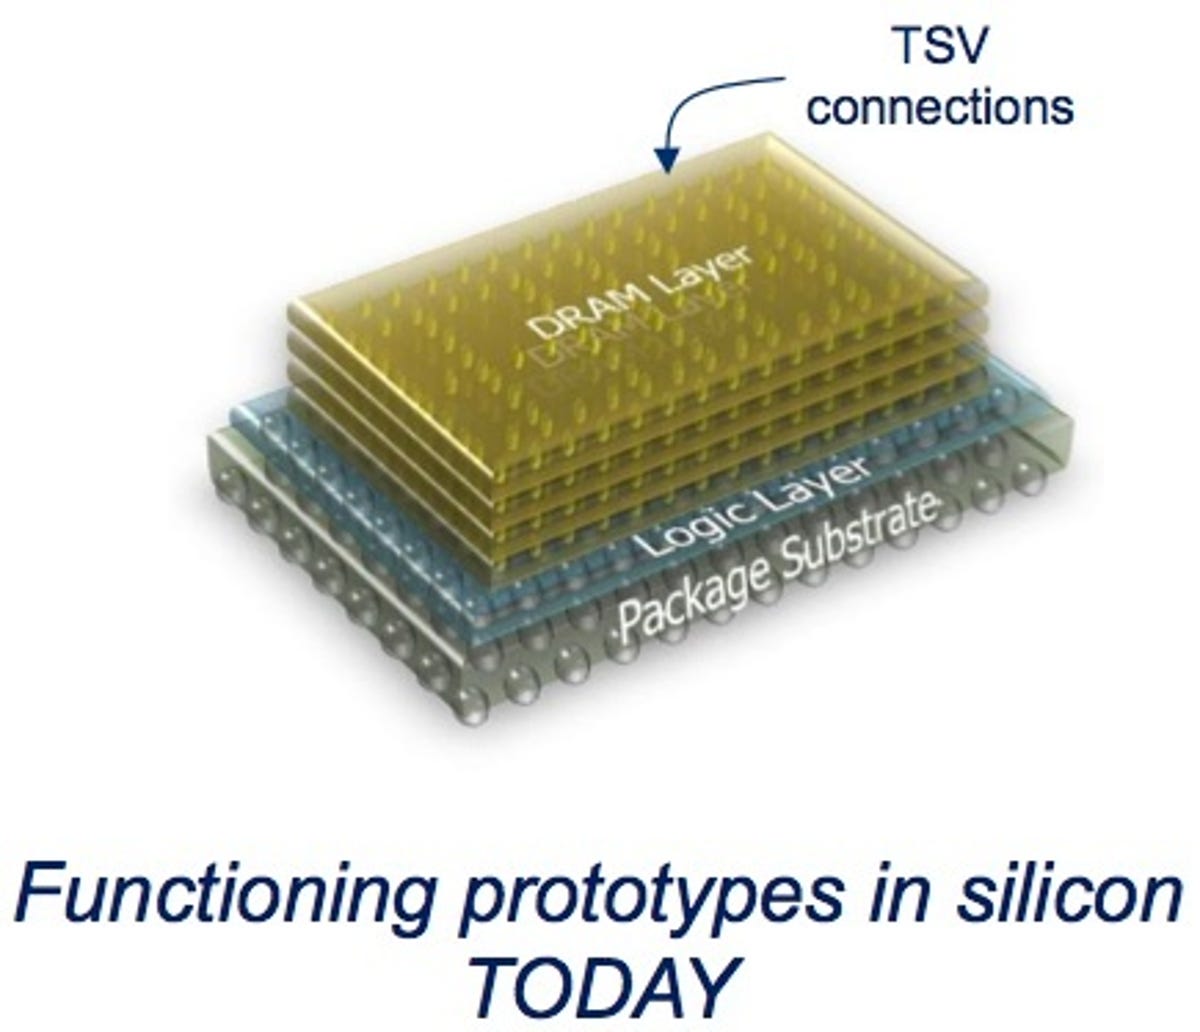 Micron uses through-silicon via (TSV) technology to stack memory on top of a controller chip. The on-chip controller is the key to delivering the performance boost (logic layer).